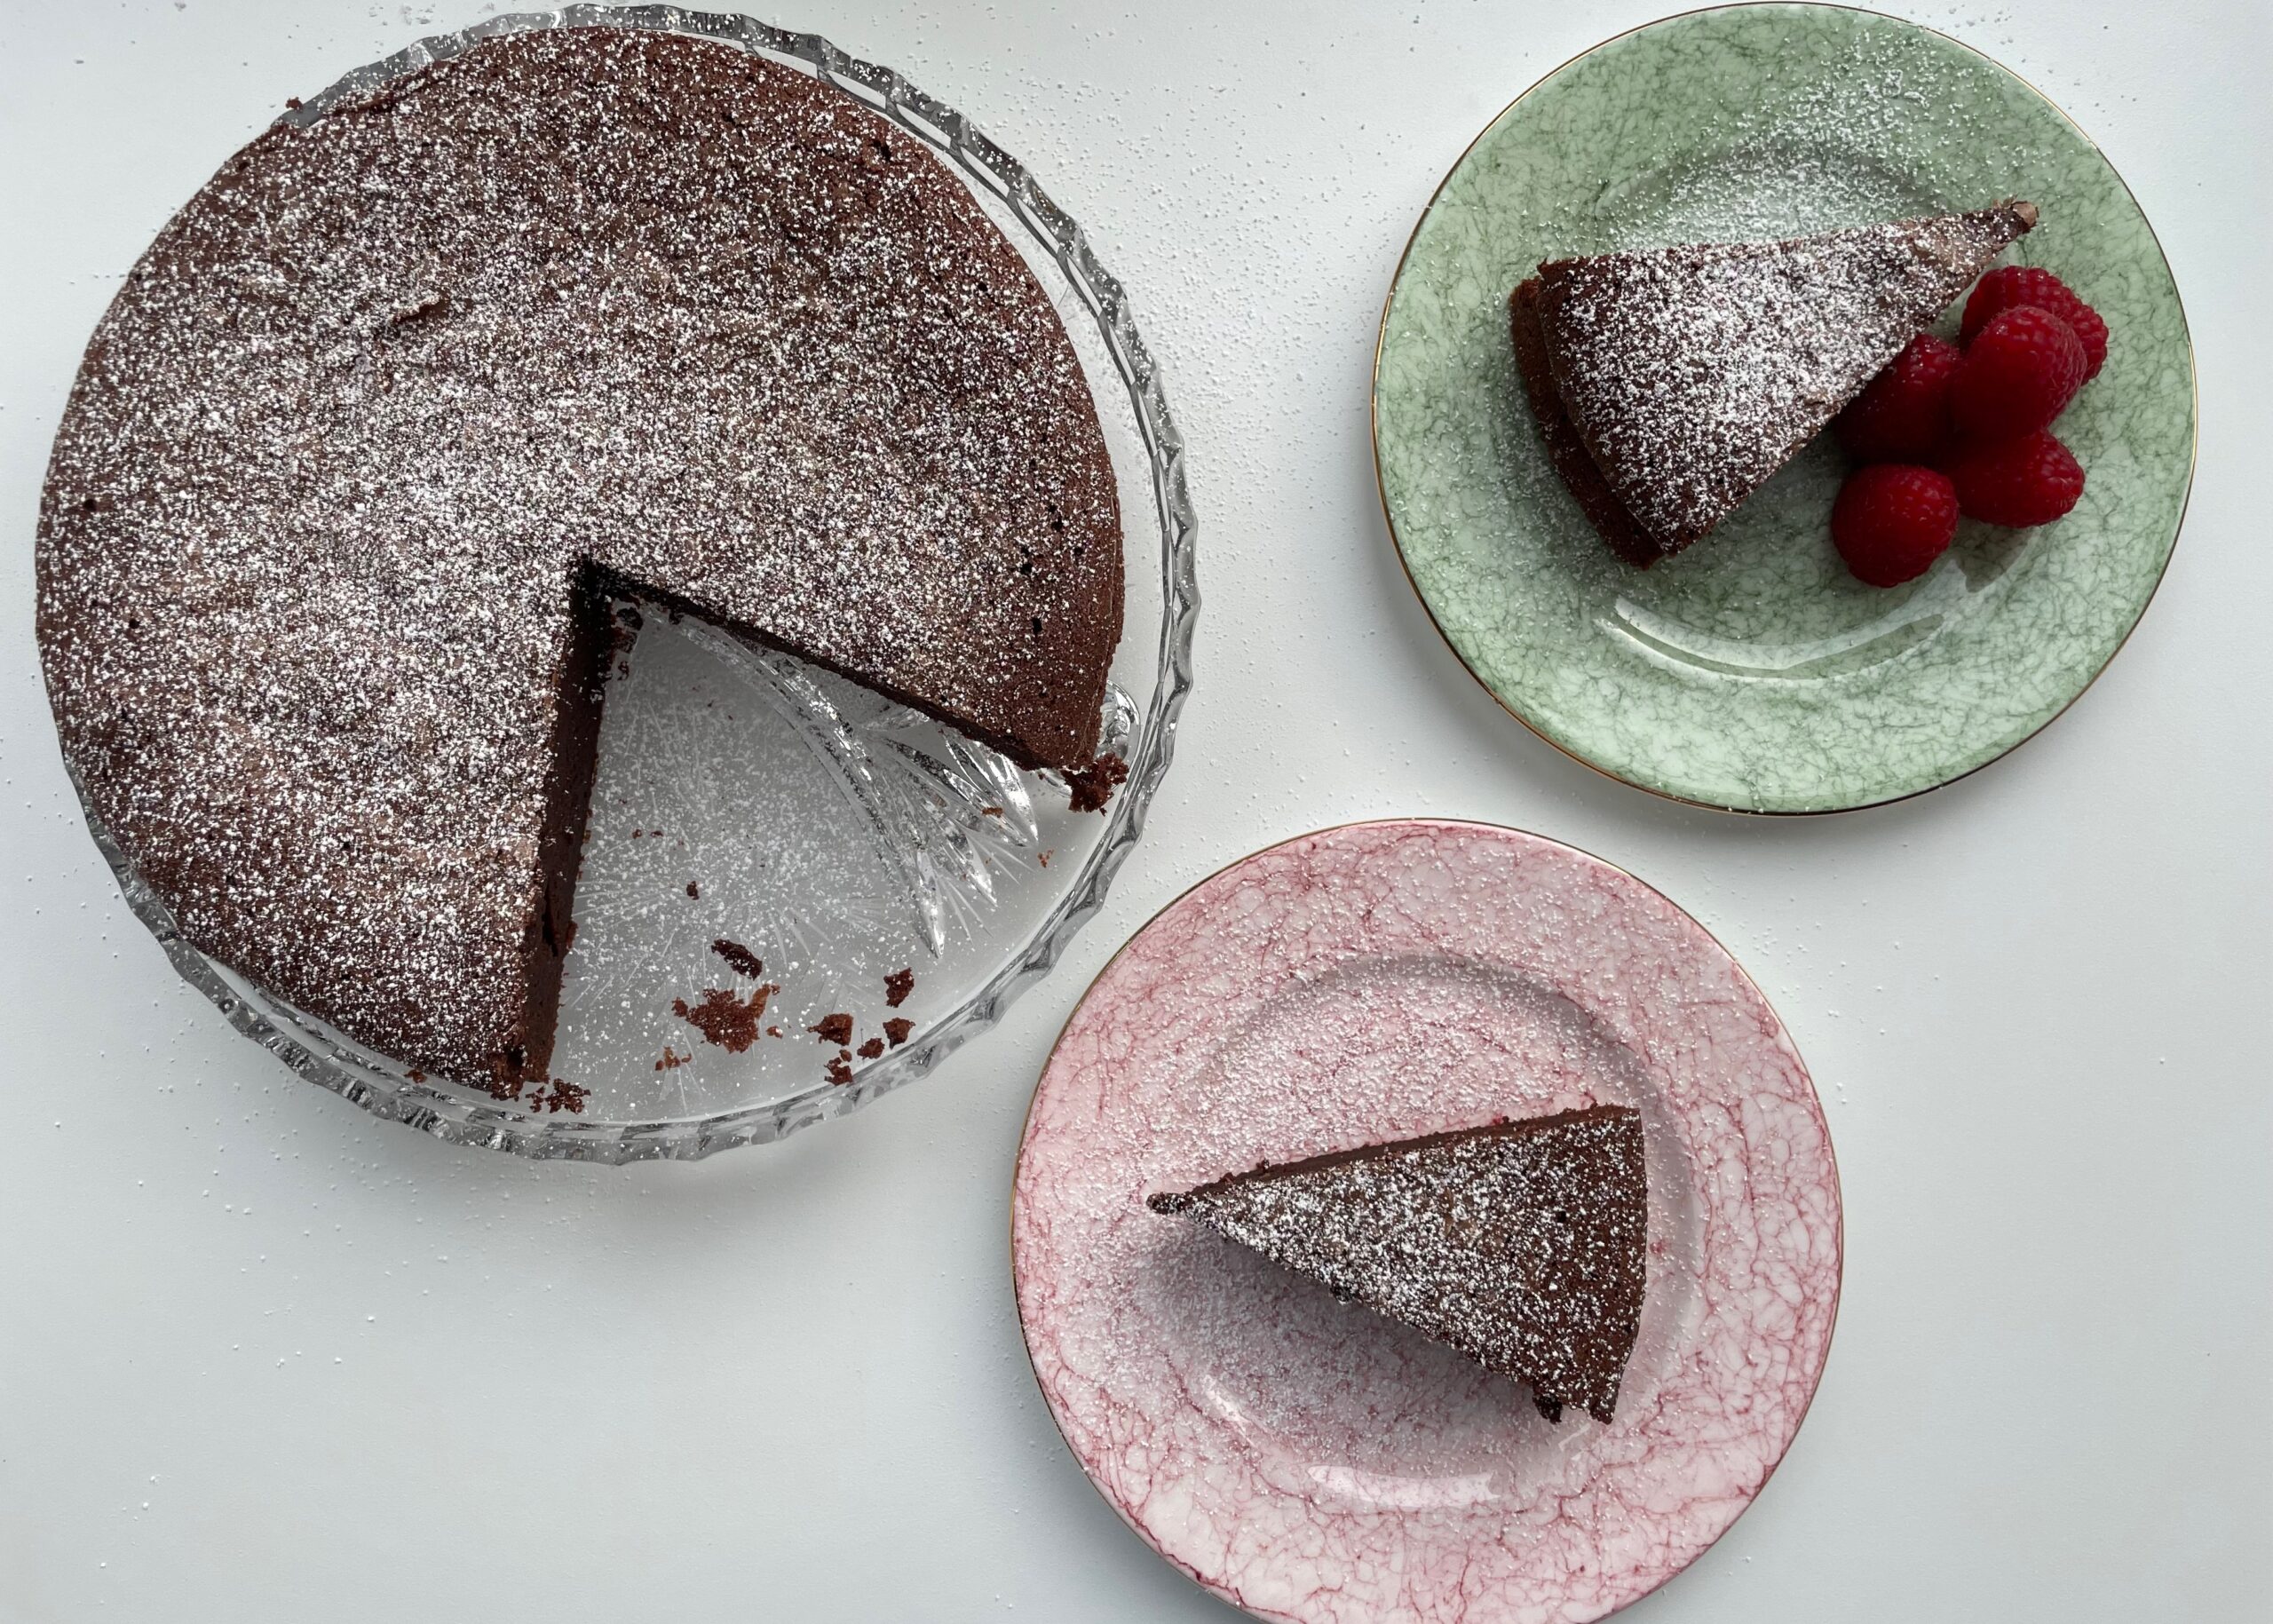 Gluten free French chocolate cake - cut into slices